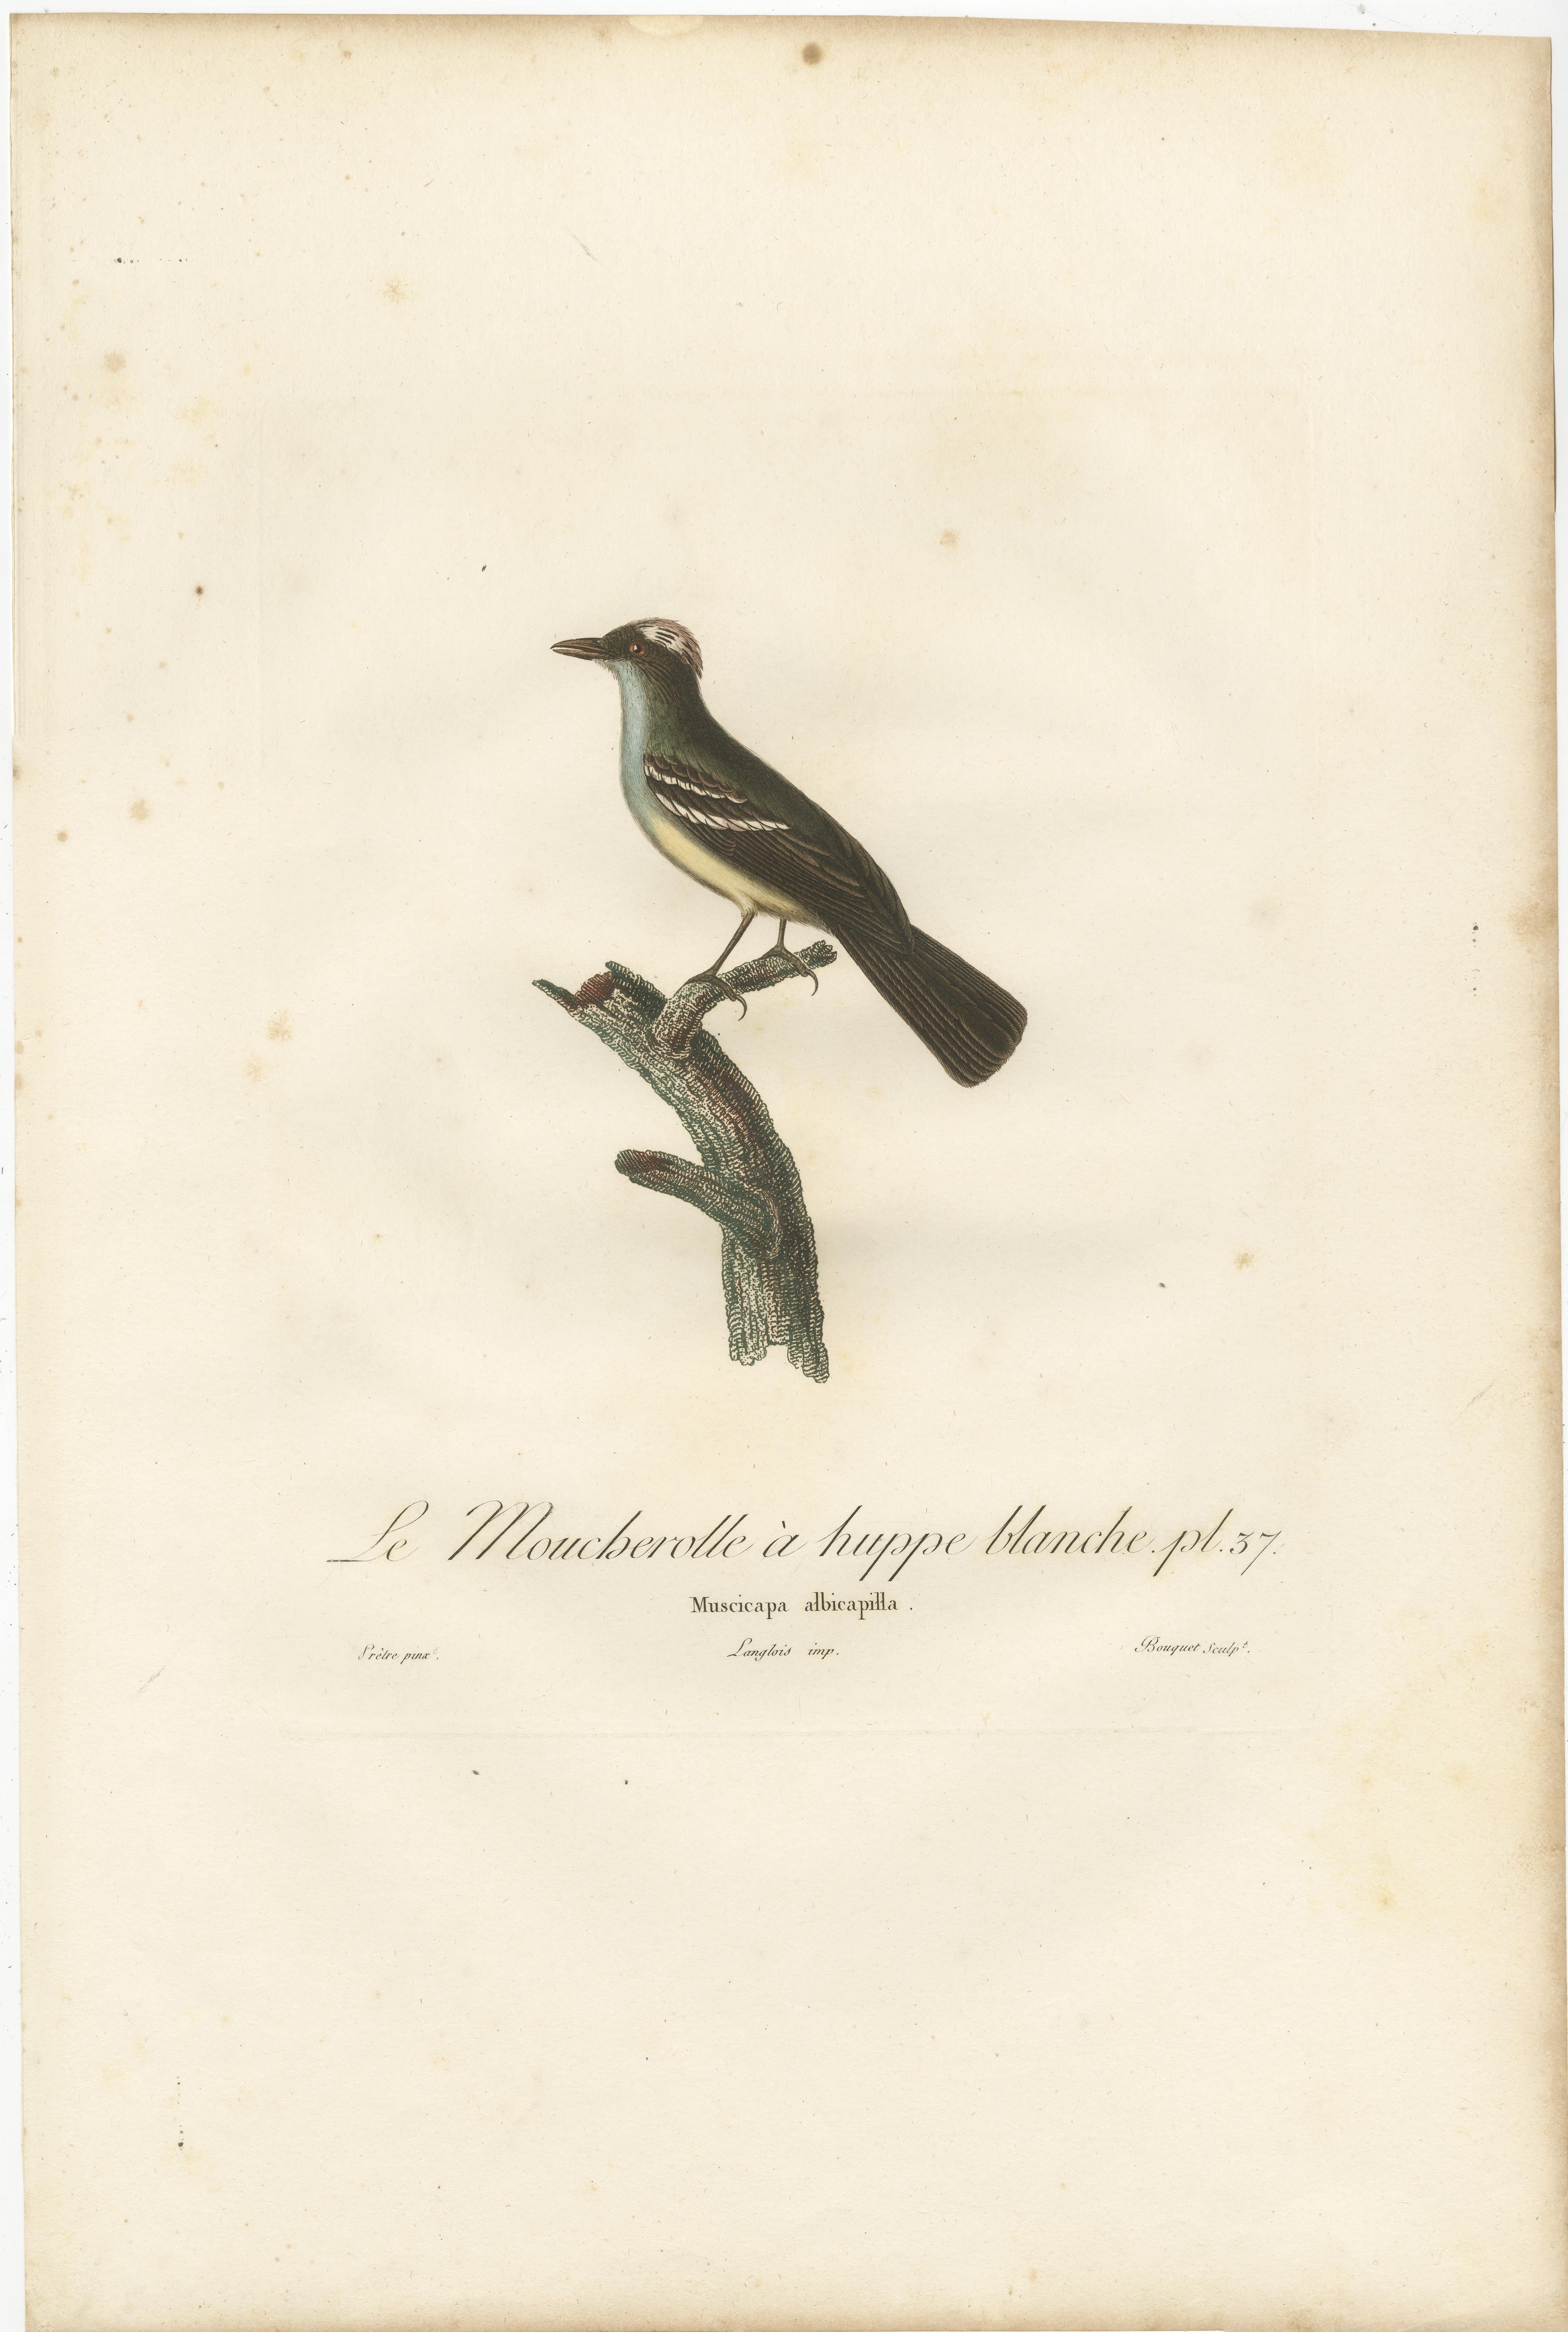 The uploaded handcolored antique print, titled 'Le Moucherolle à huppe blanche', represents a white-crested flycatcher, known for its distinctive plumage. The bird is shown perched elegantly on a branch, with its head raised, displaying a prominent